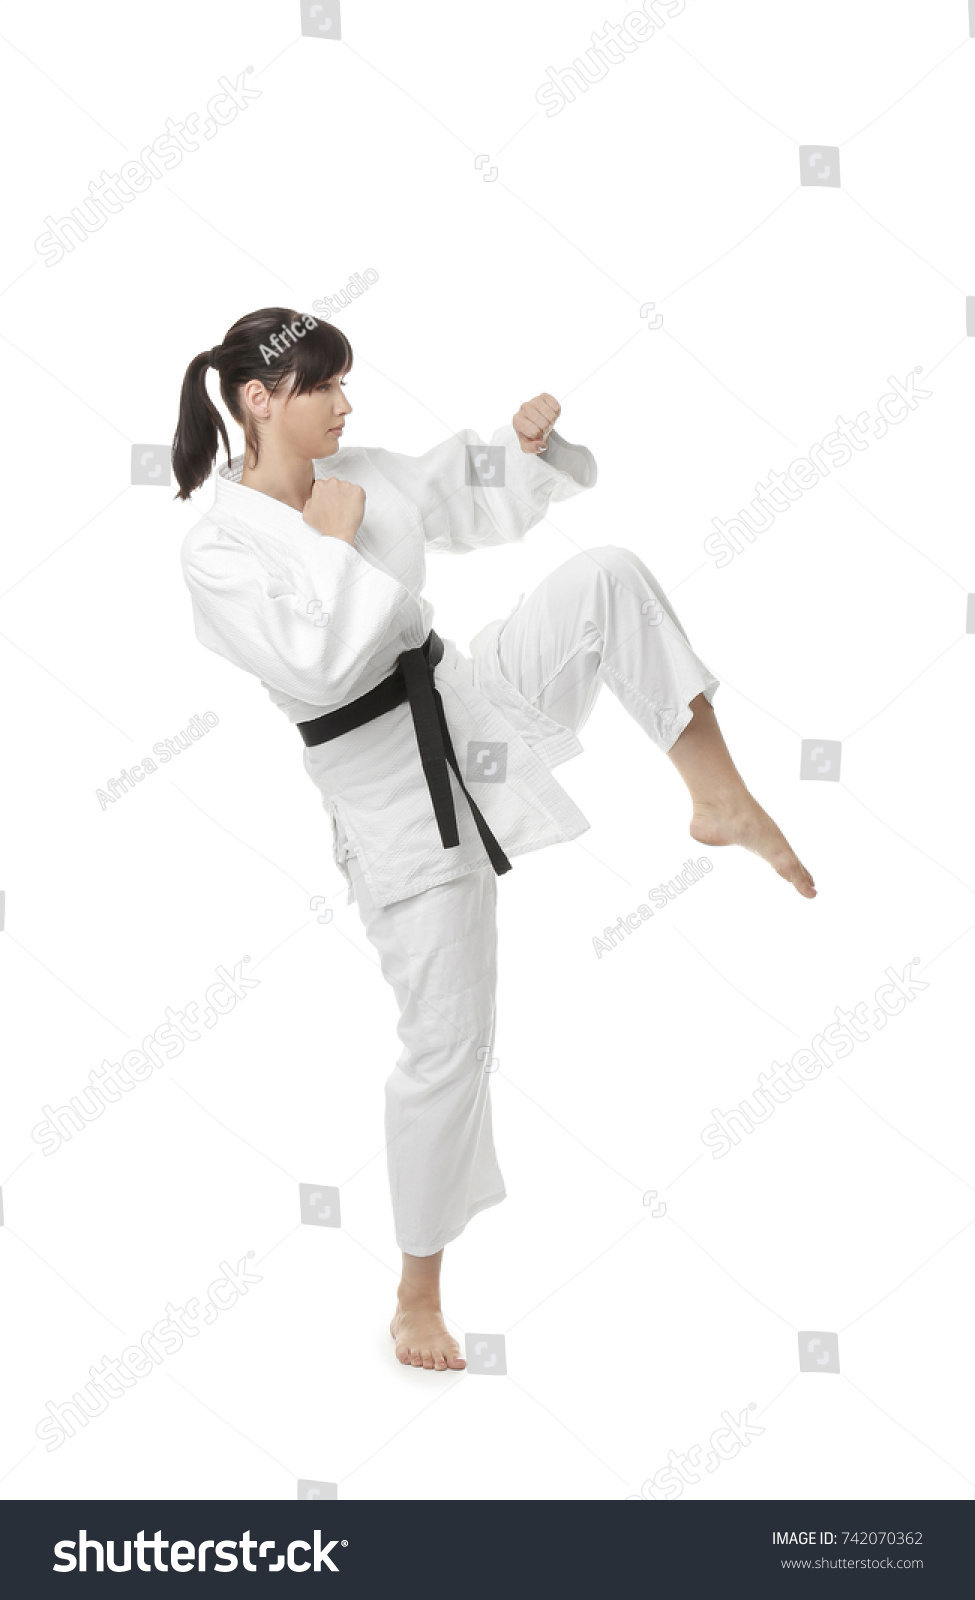 Young woman practicing karate on white background #742070362